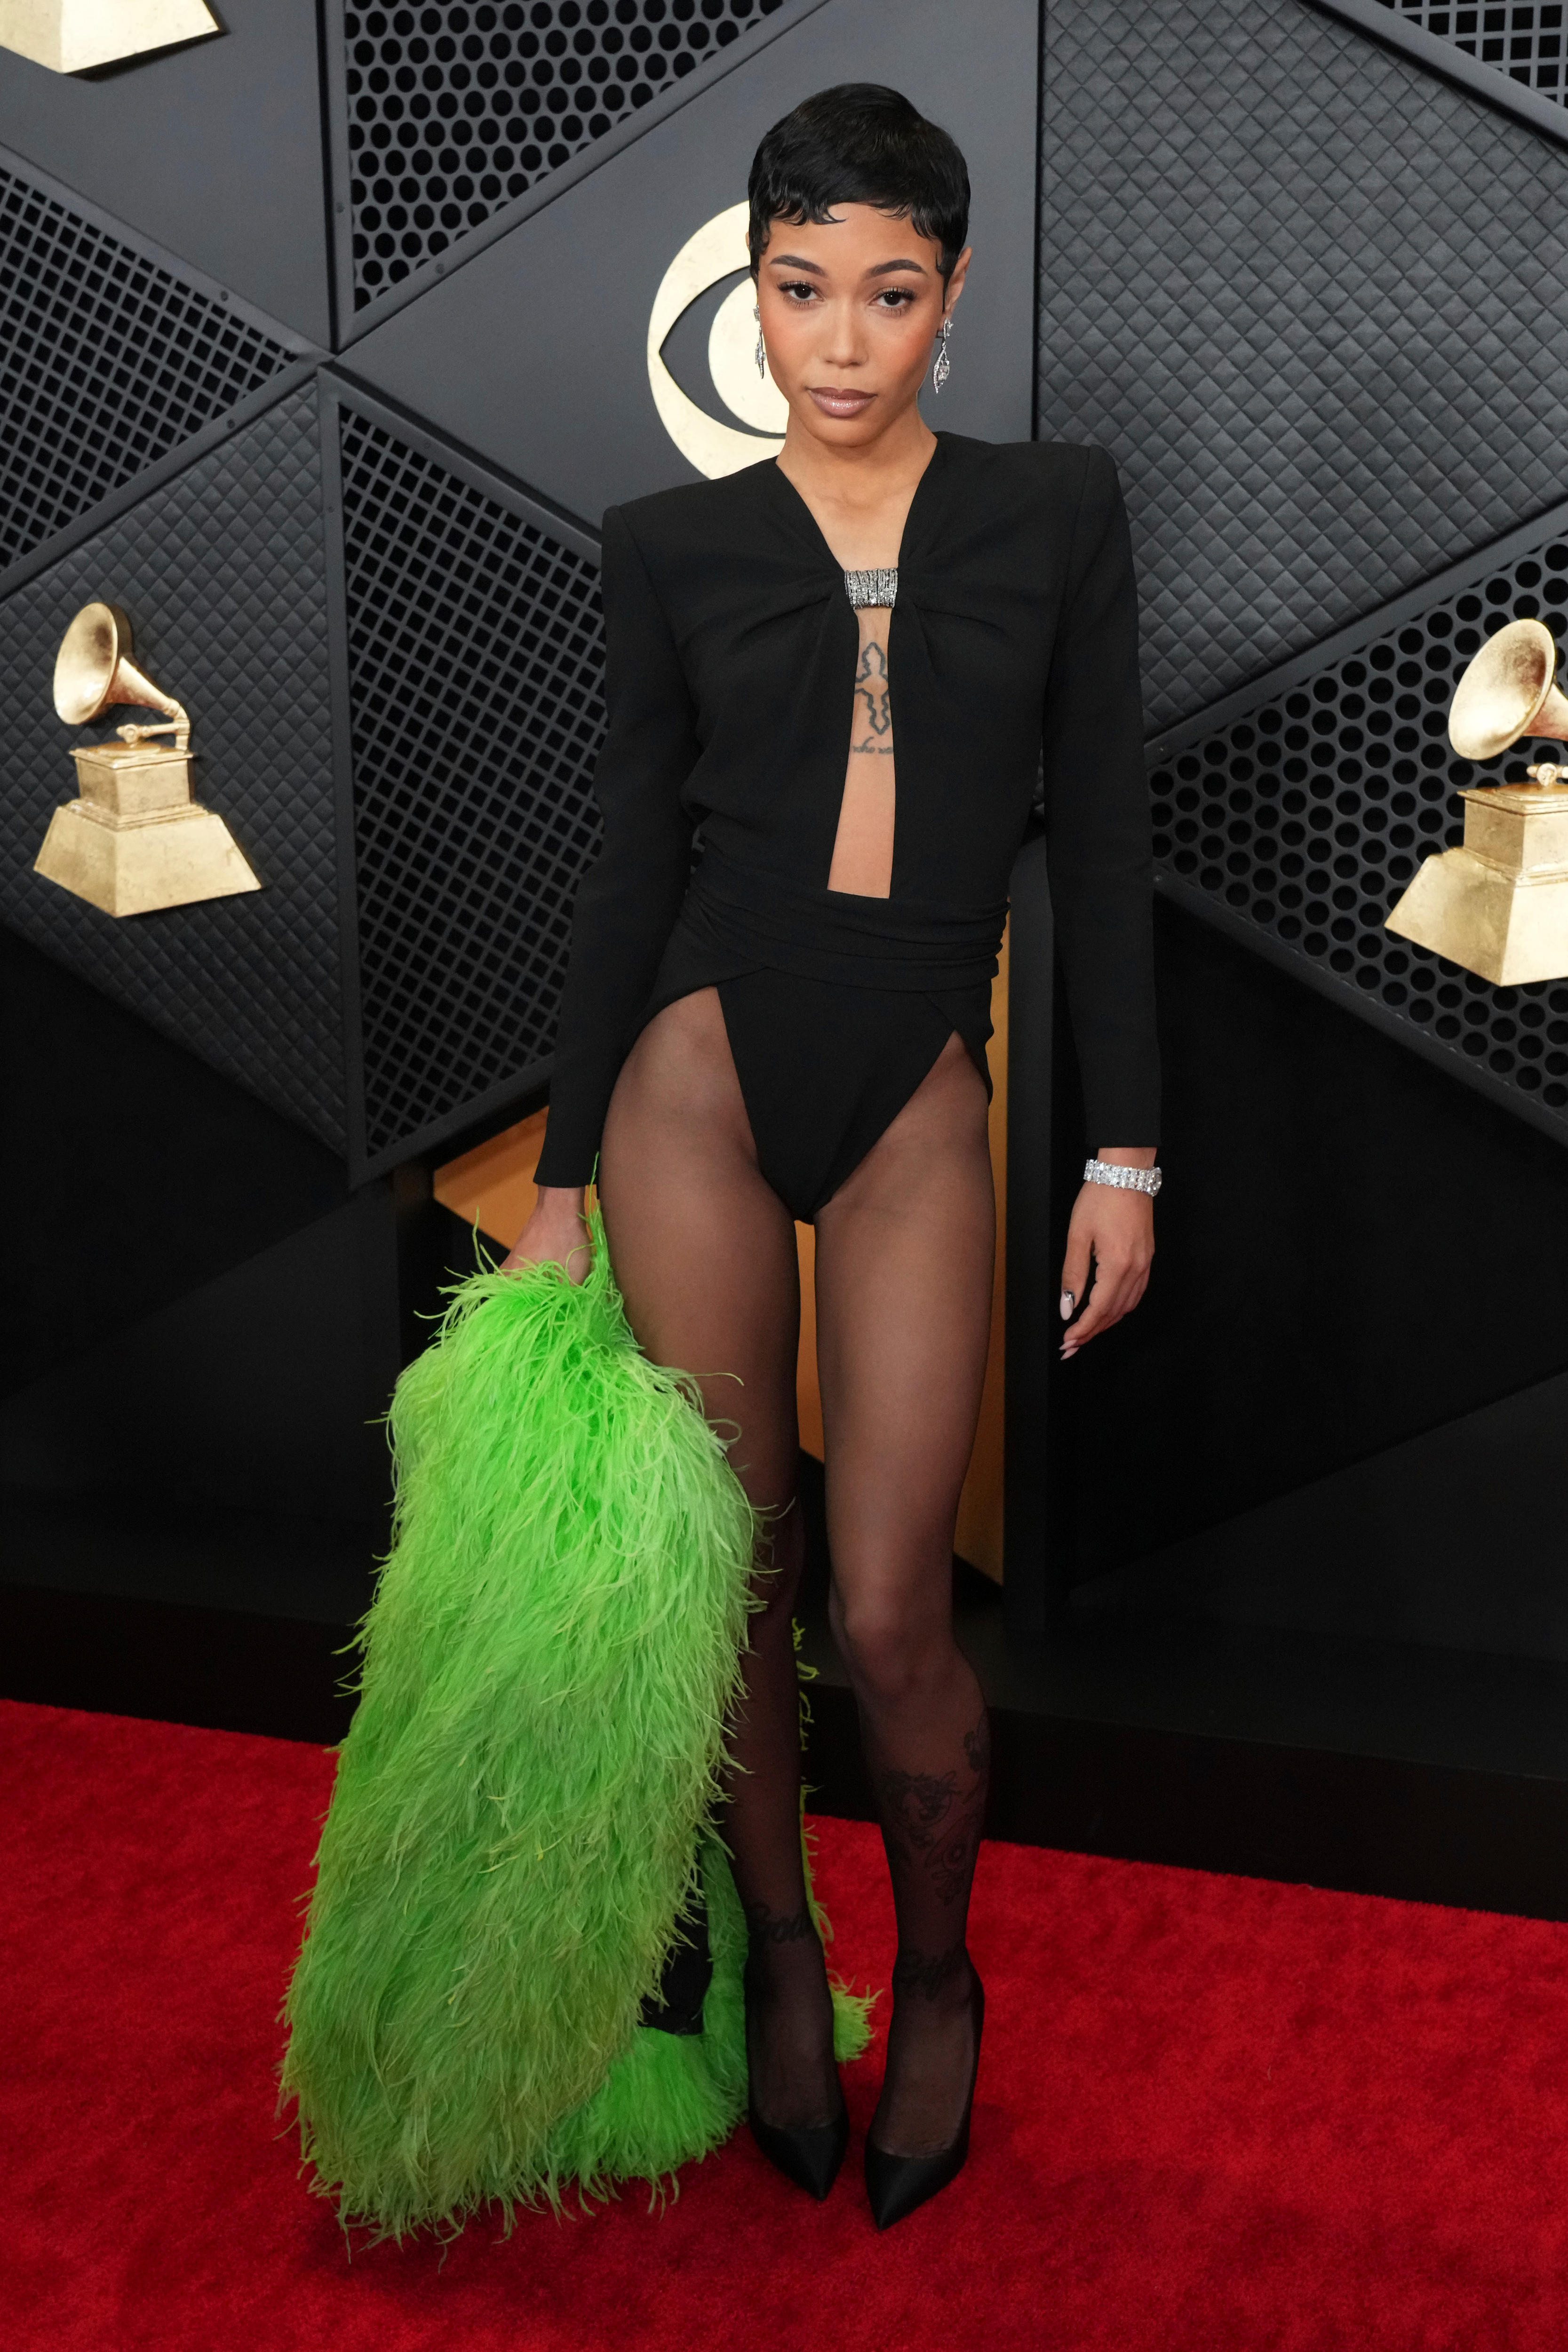 Coi Leray wearing a balack blazer-like leotard with stockings and carrying a fluffy green jacket